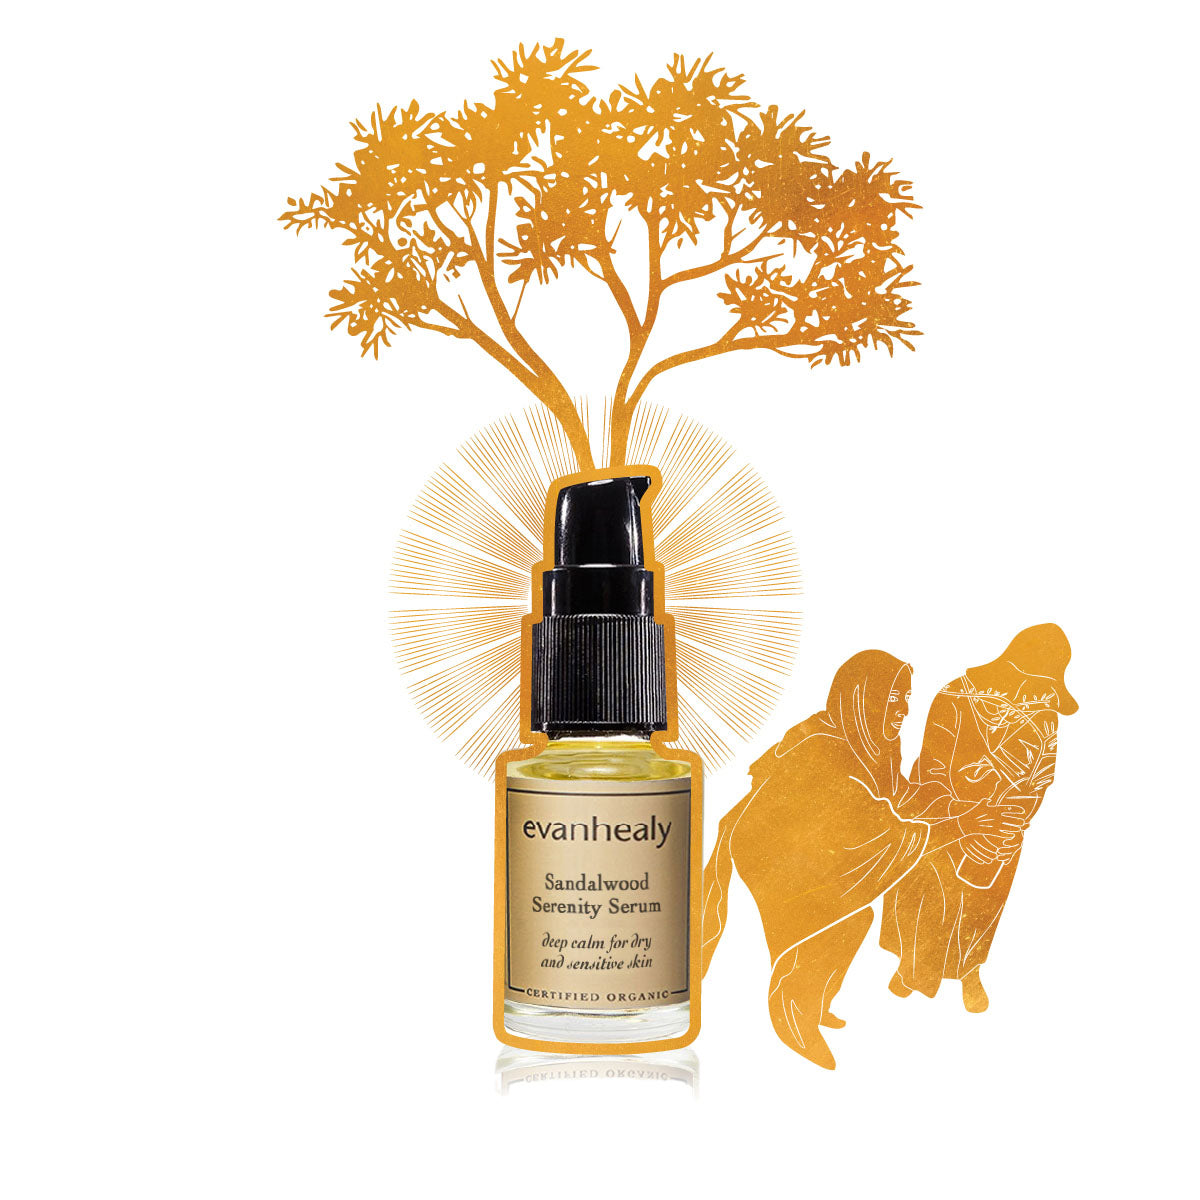 evanhealy sustainable sandalwood serenity serum facial oil for face gilded graphic